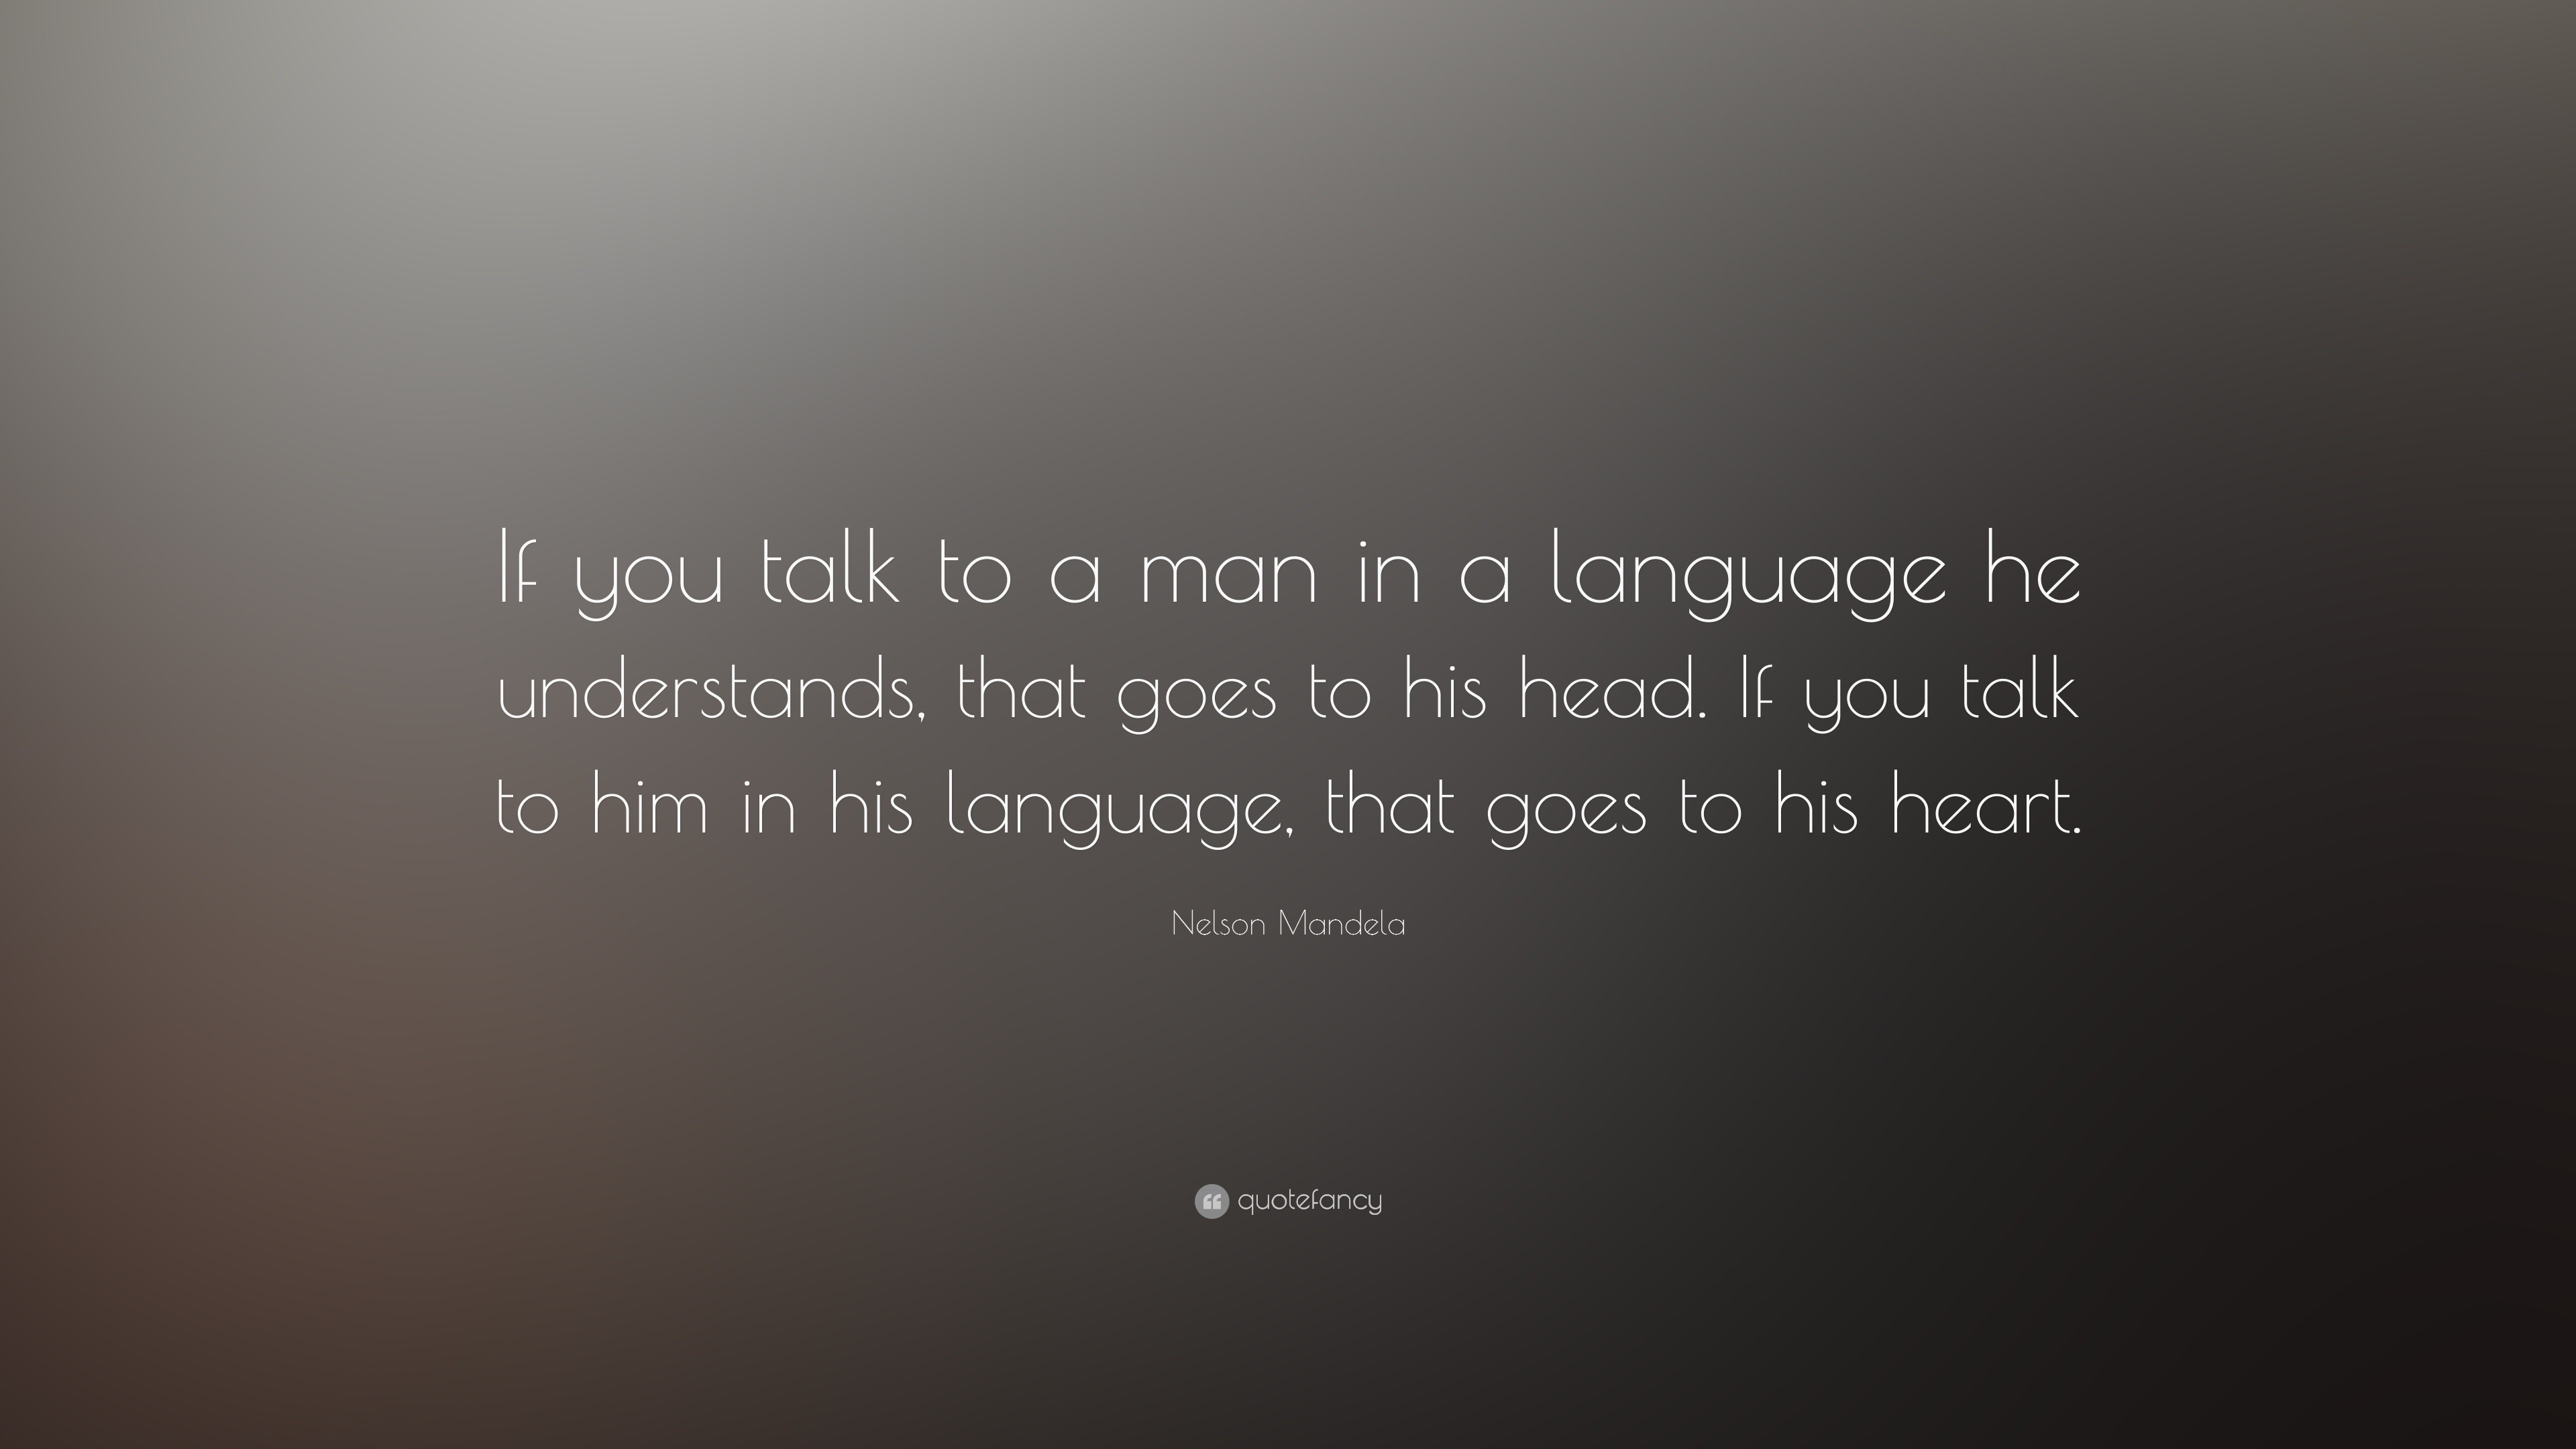 992-Nelson-Mandela-Quote-If-you-talk-to-a-man-in-a-language-he.jpg